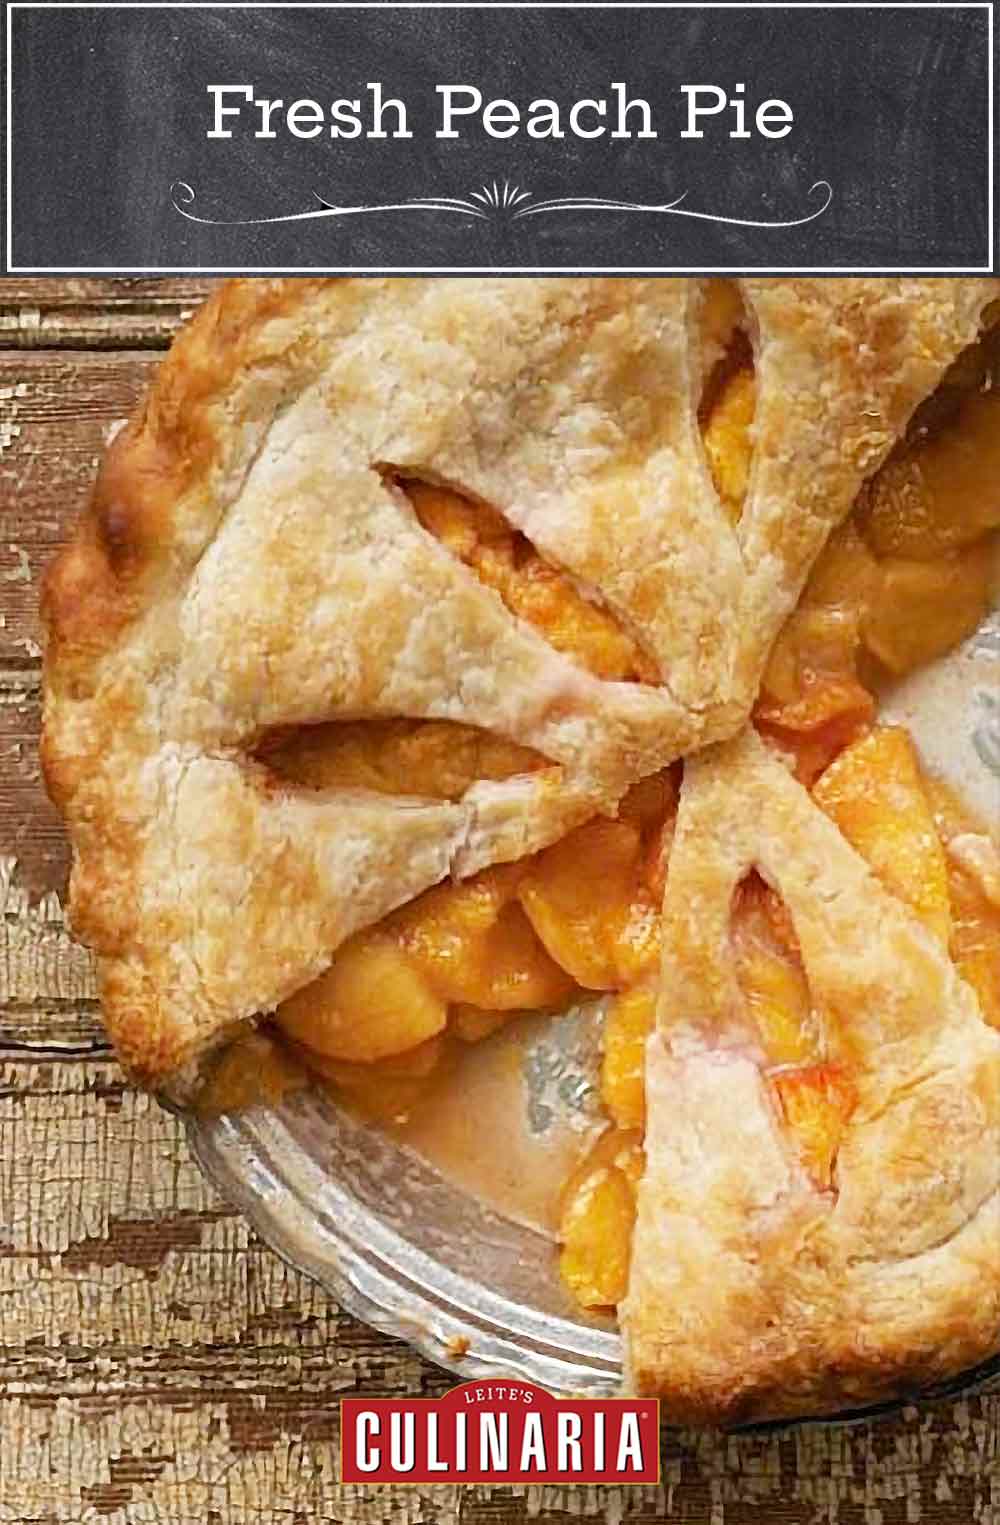 A baked fresh peach pie with three slices missing.